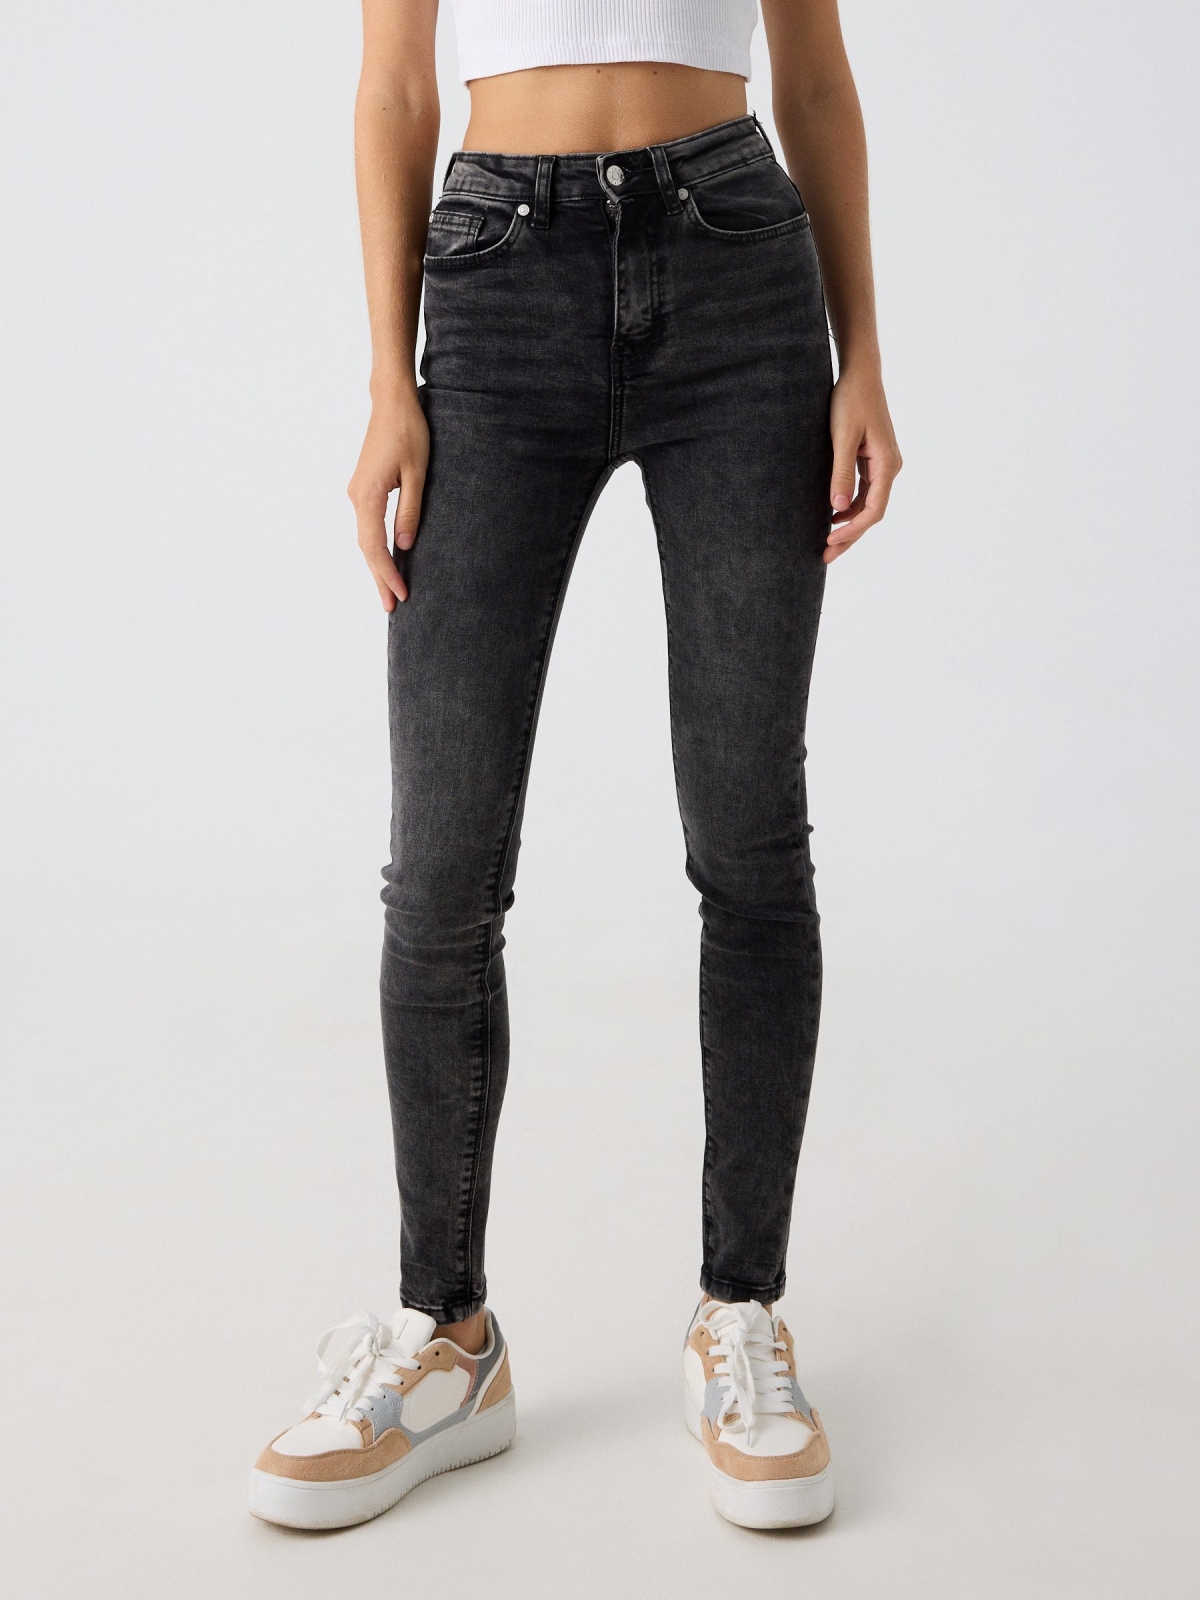 Washed black high waisted skinny jeans black middle front view